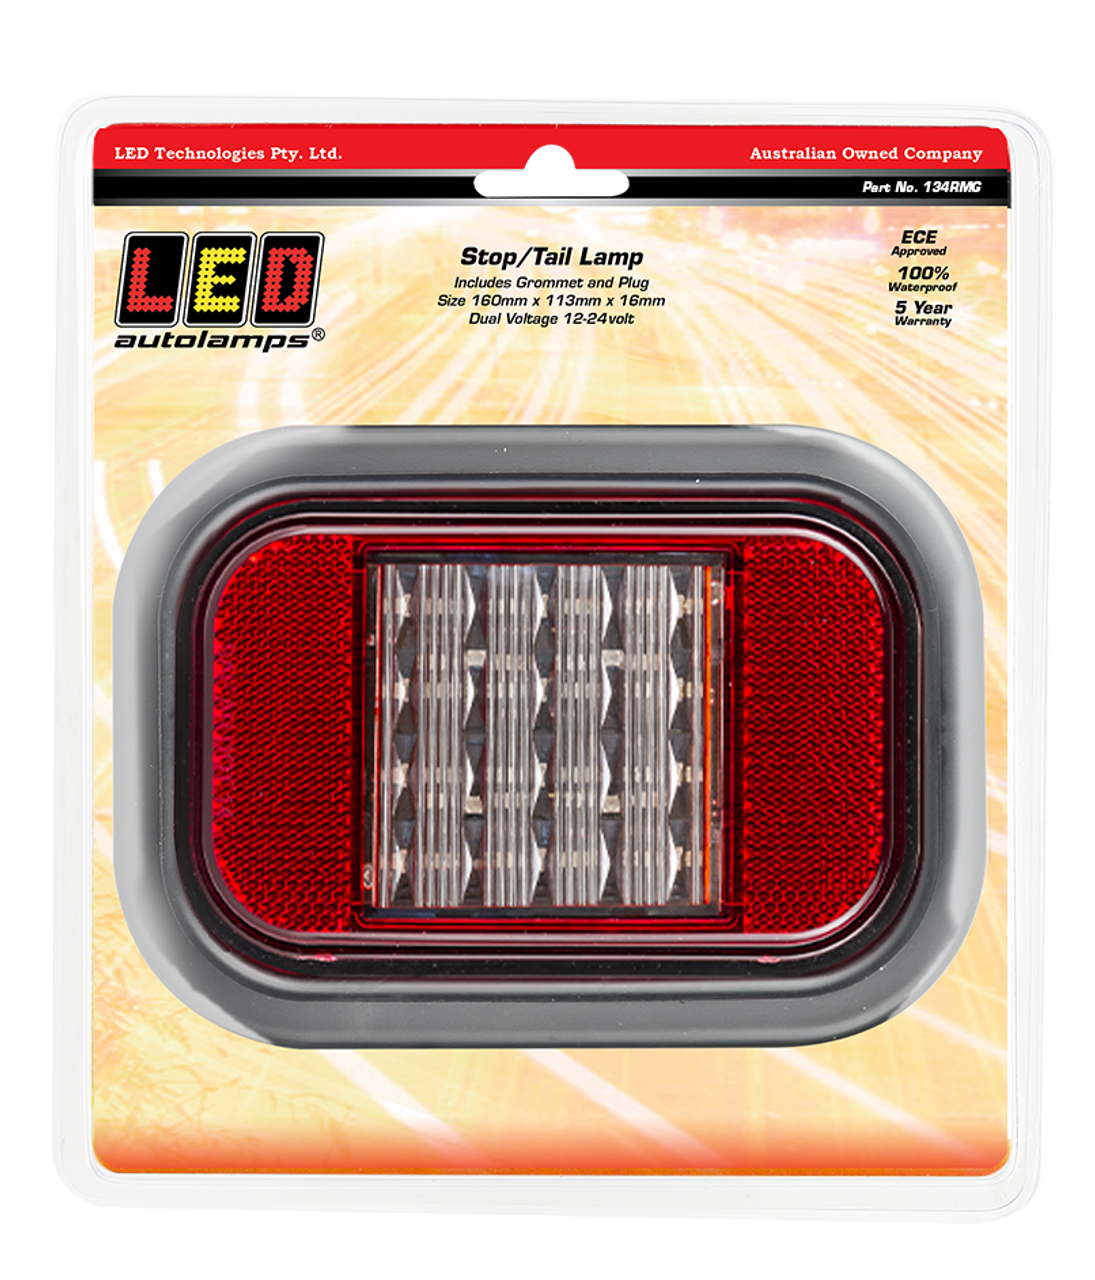 134RMG - Rectangle Recessed Mount Single Function Light. Stop Tail Light with Reflector. High Brightness. Shock, Dust & Water Proof. Includes Grommet and Plug. Multi-Volt 12v & 24v. Autolamps. Ultimate LED.